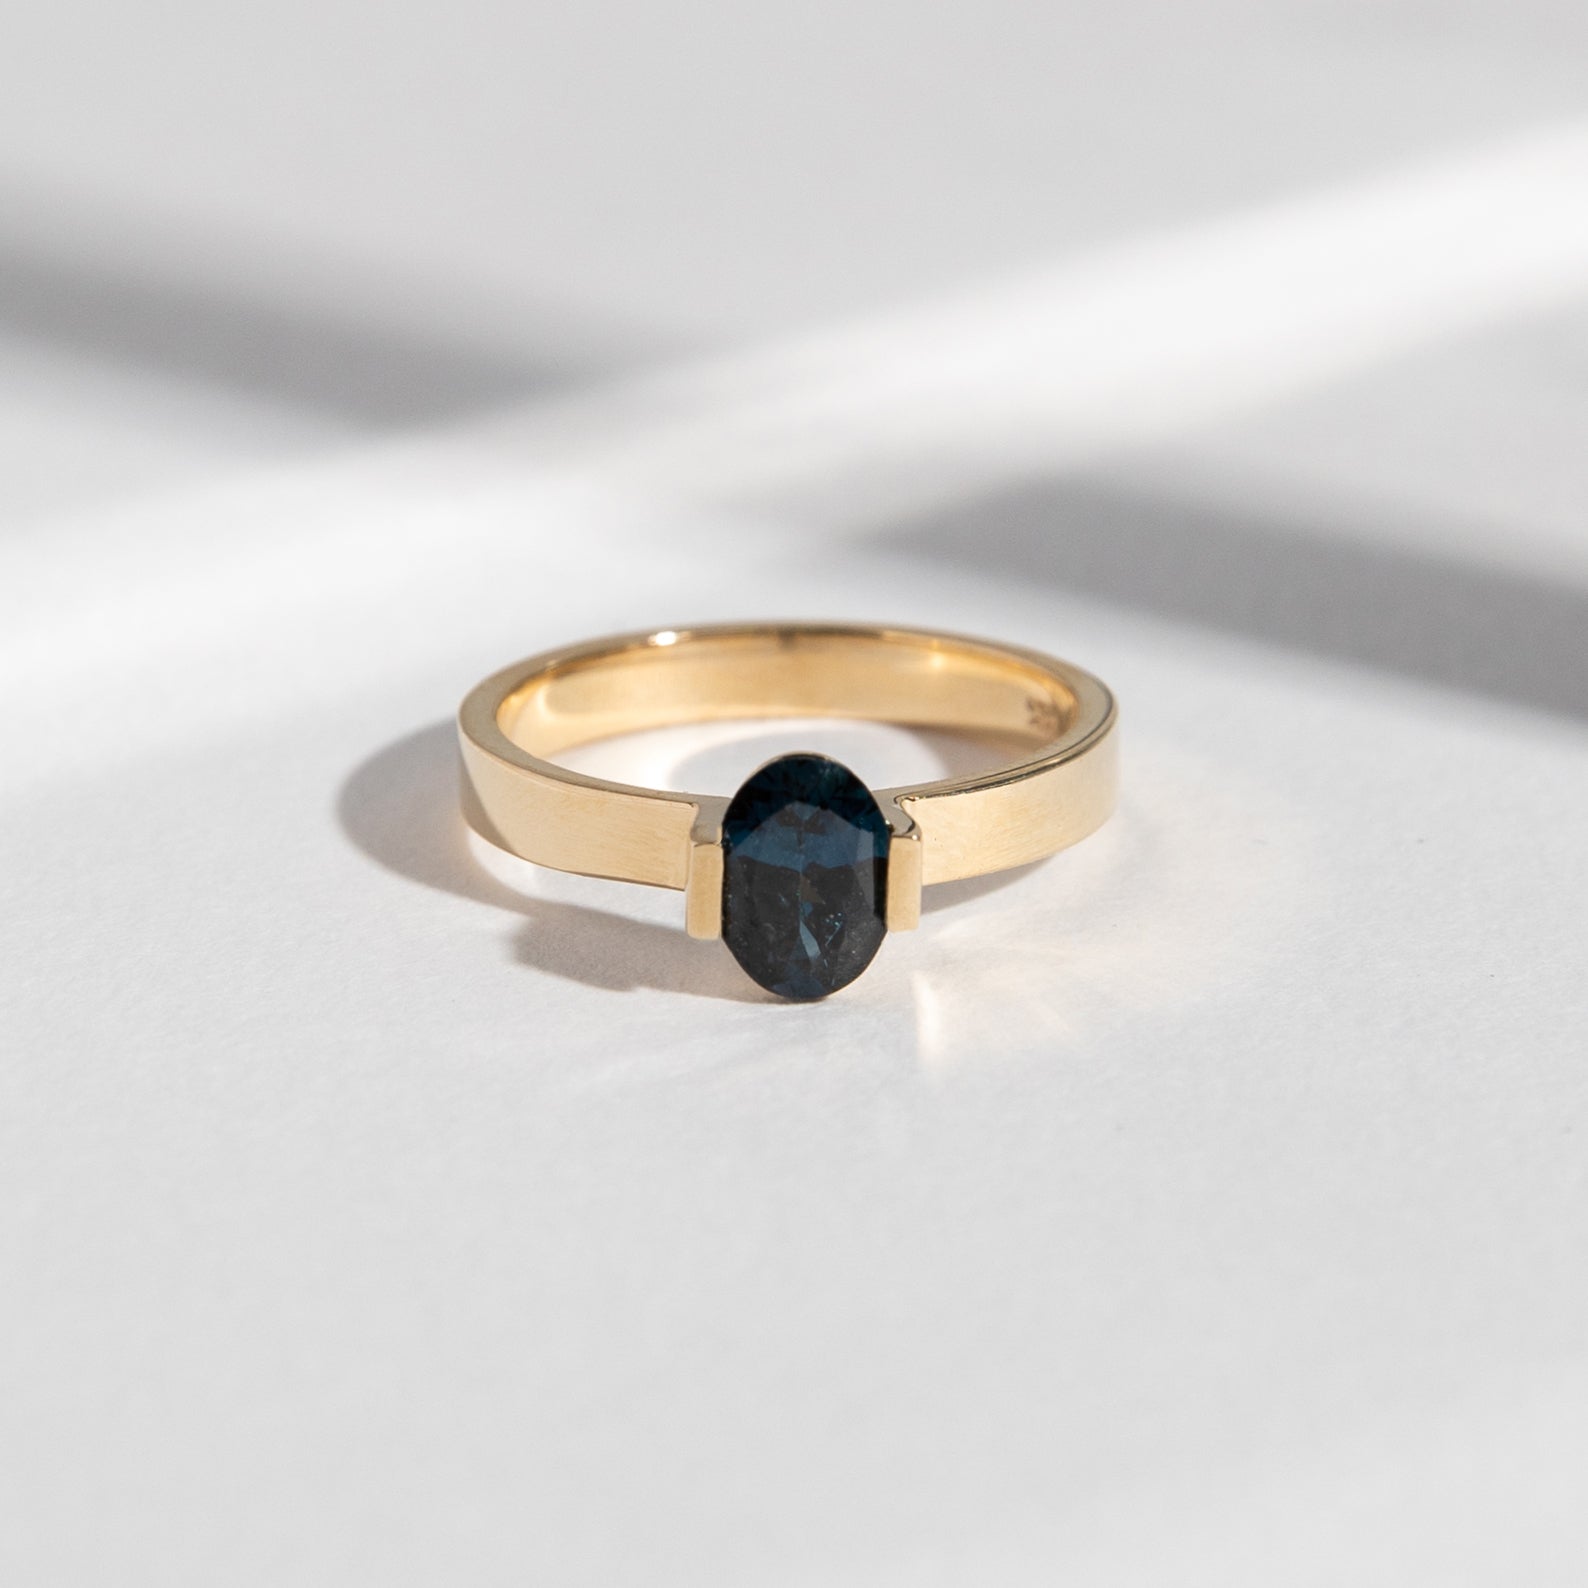 Silva Minimalist Ring in 14k Gold set with a 1ct  oval cut sapphire By SHW Fine Jewelry NYC